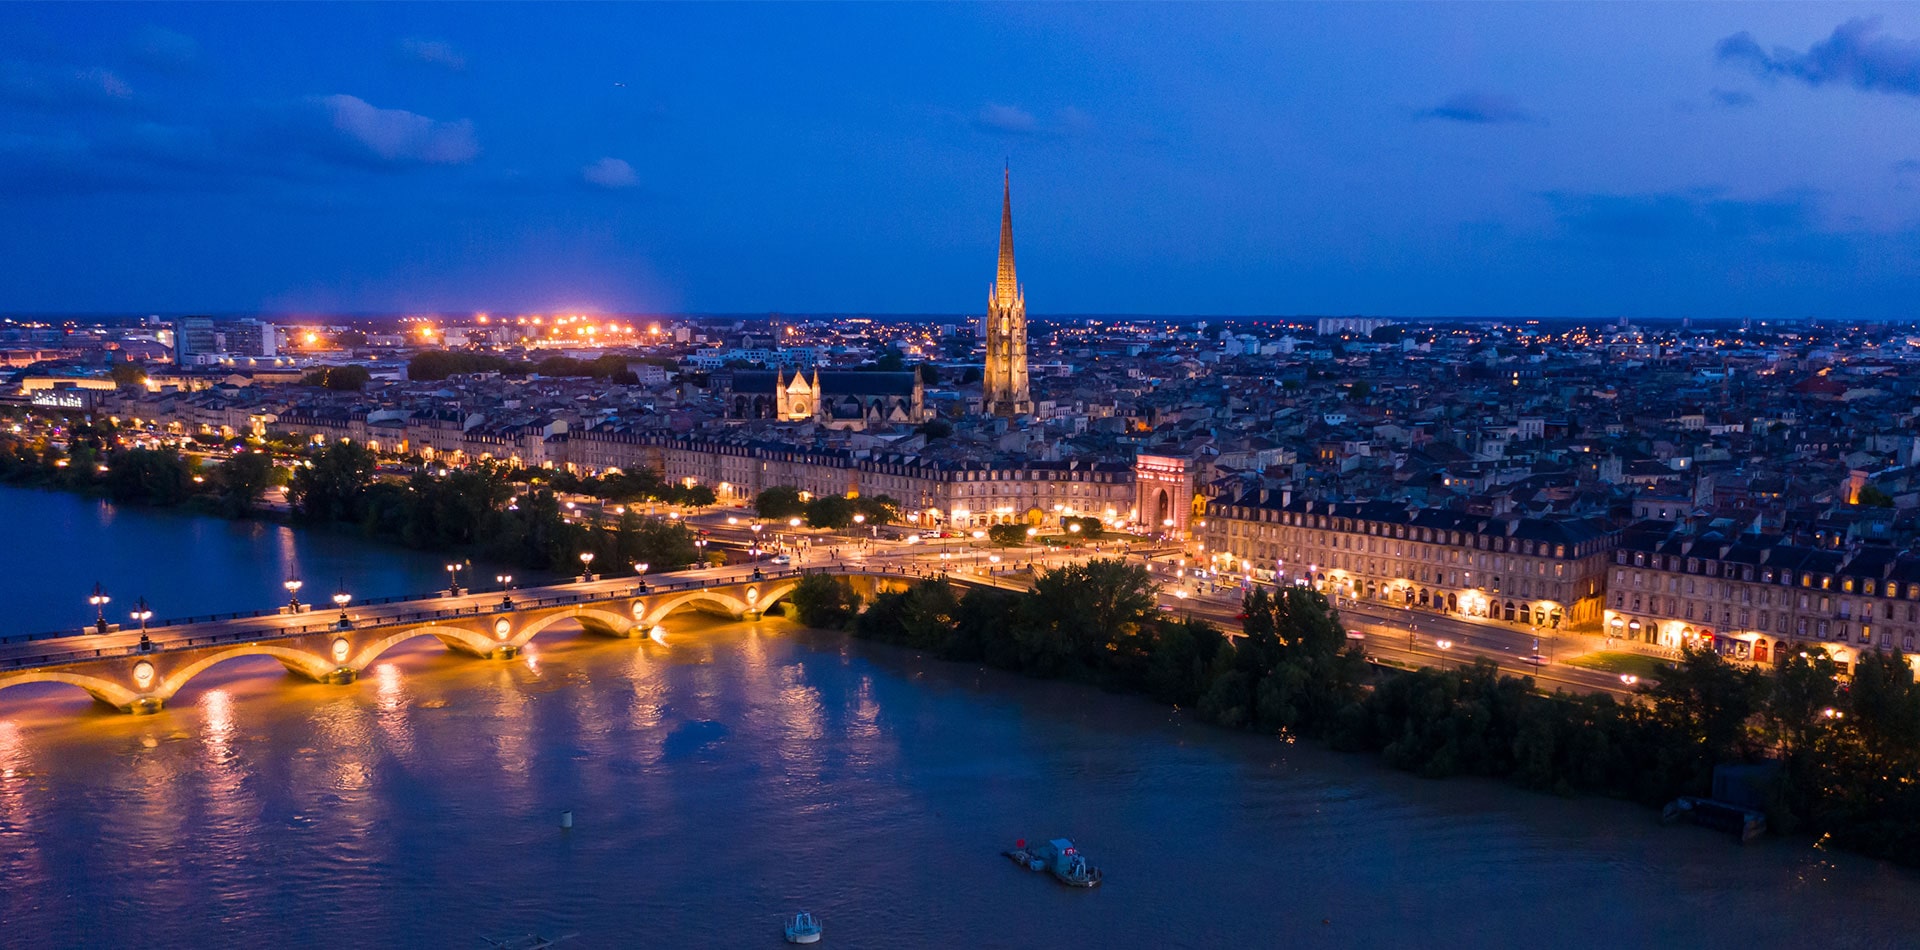 Beautiful evening views of Bordeaux and the river Seine, France